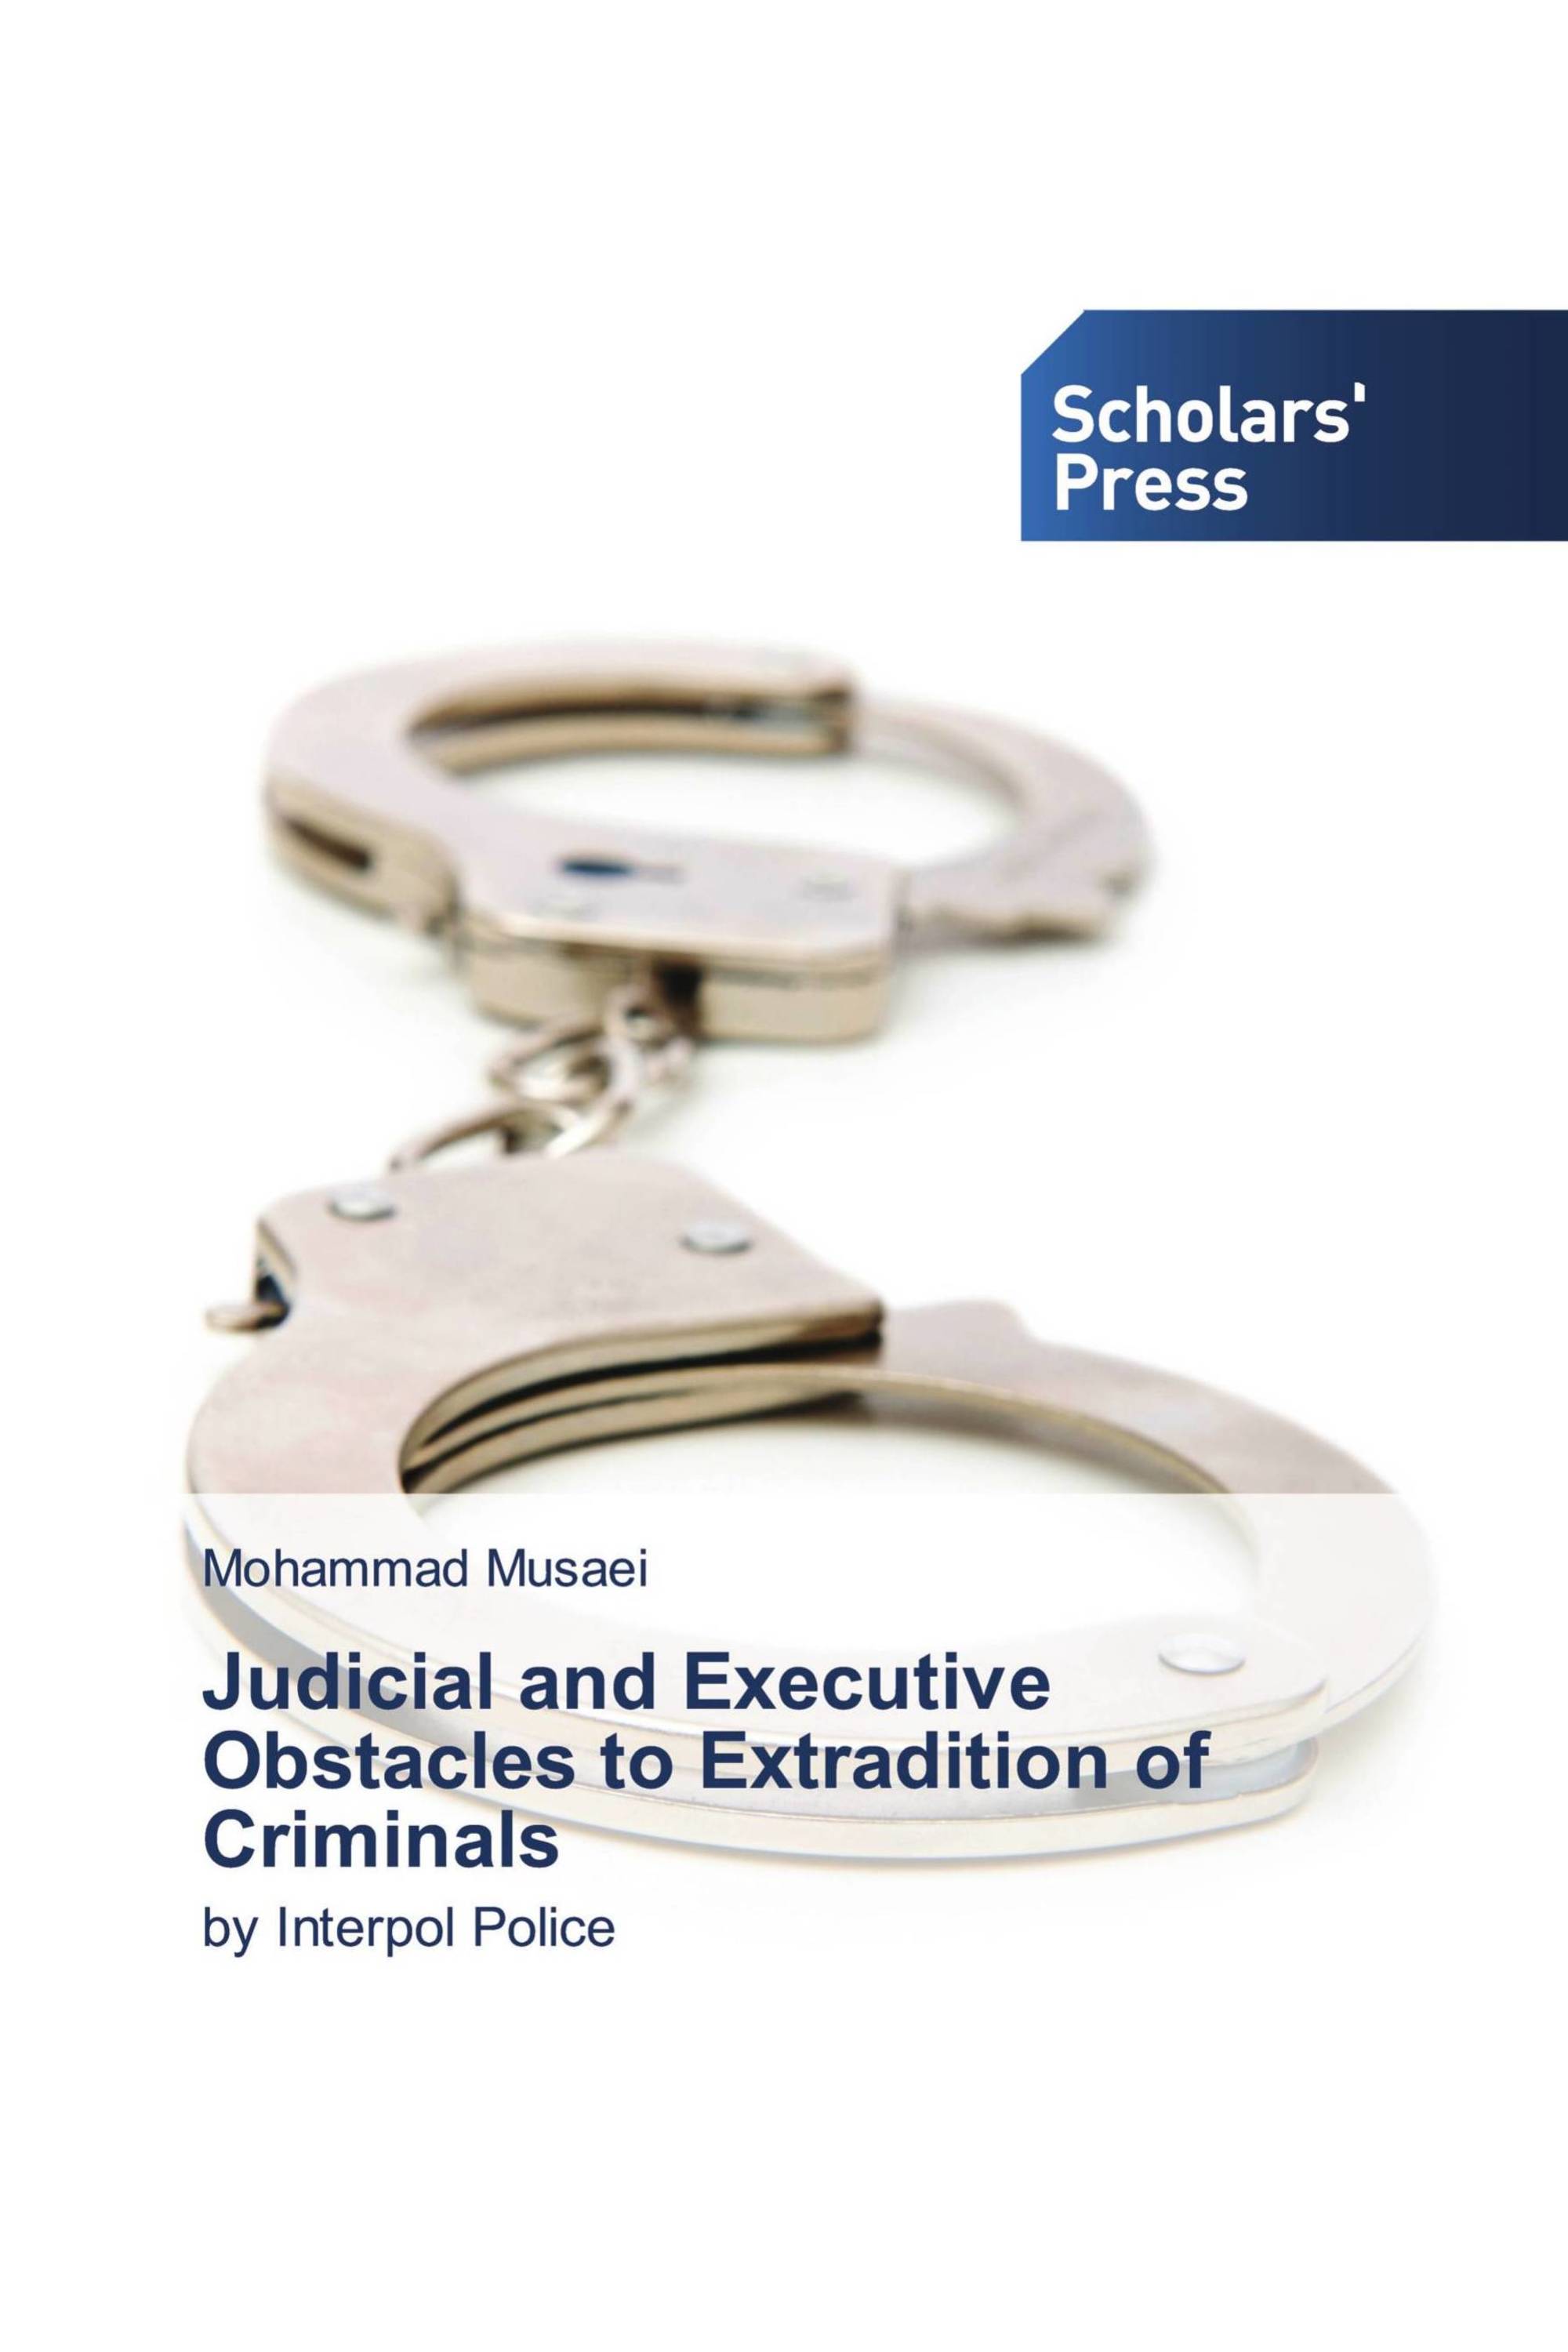 Judicial and Executive Obstacles to Extradition of Criminals